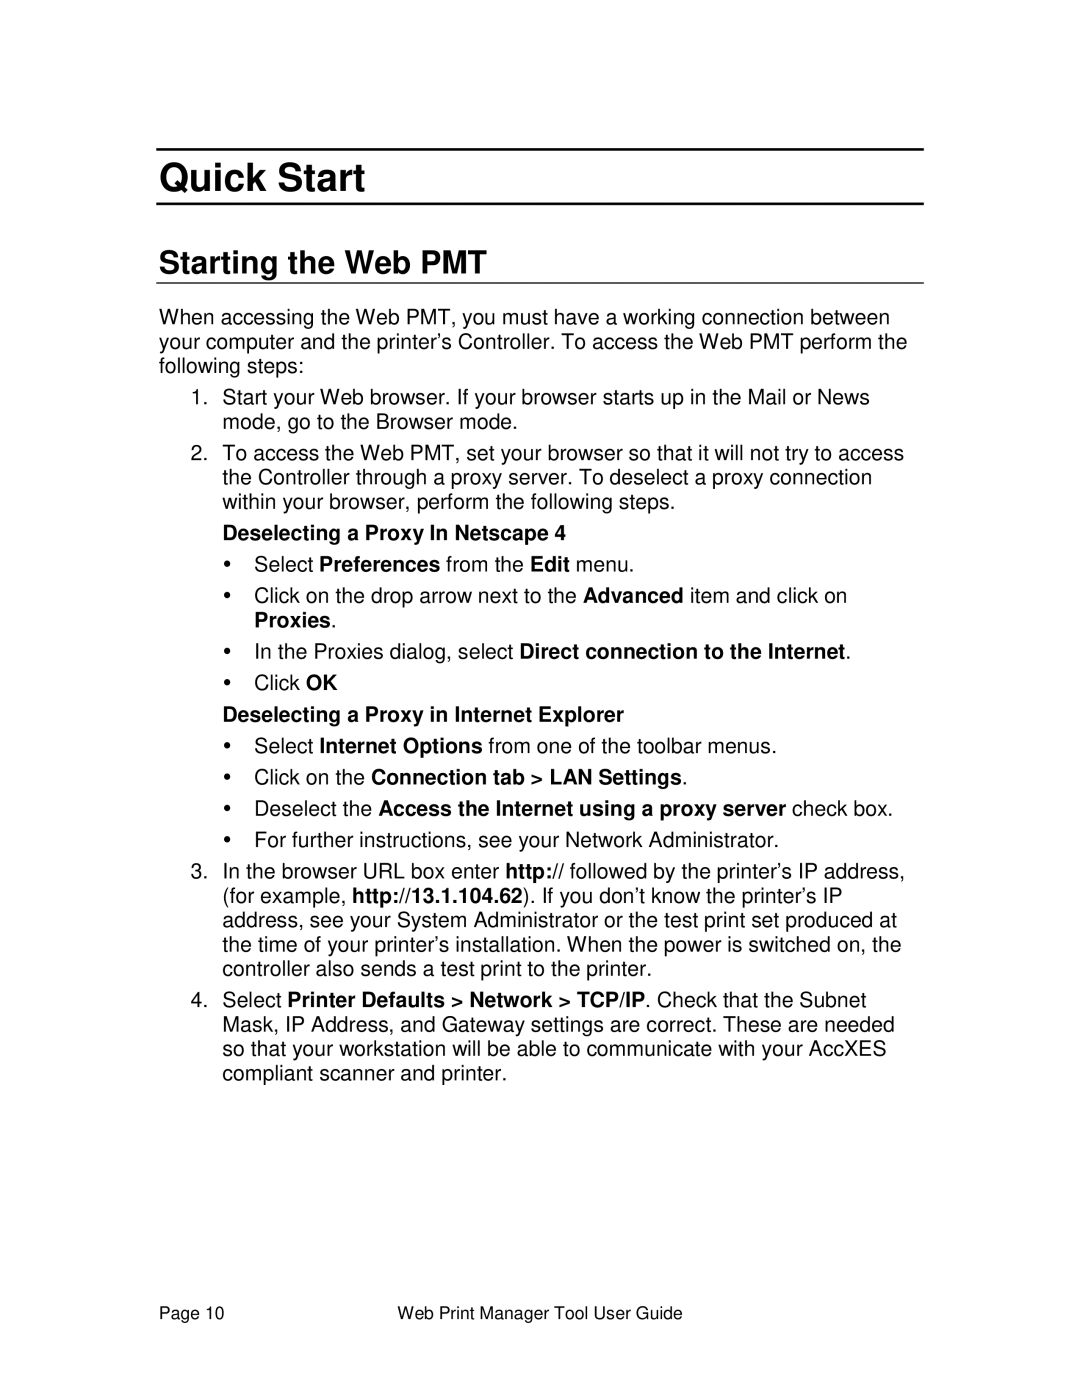 Xerox 701P39116 manual Quick Start, Starting the Web PMT, Deselecting a Proxy In Netscape 